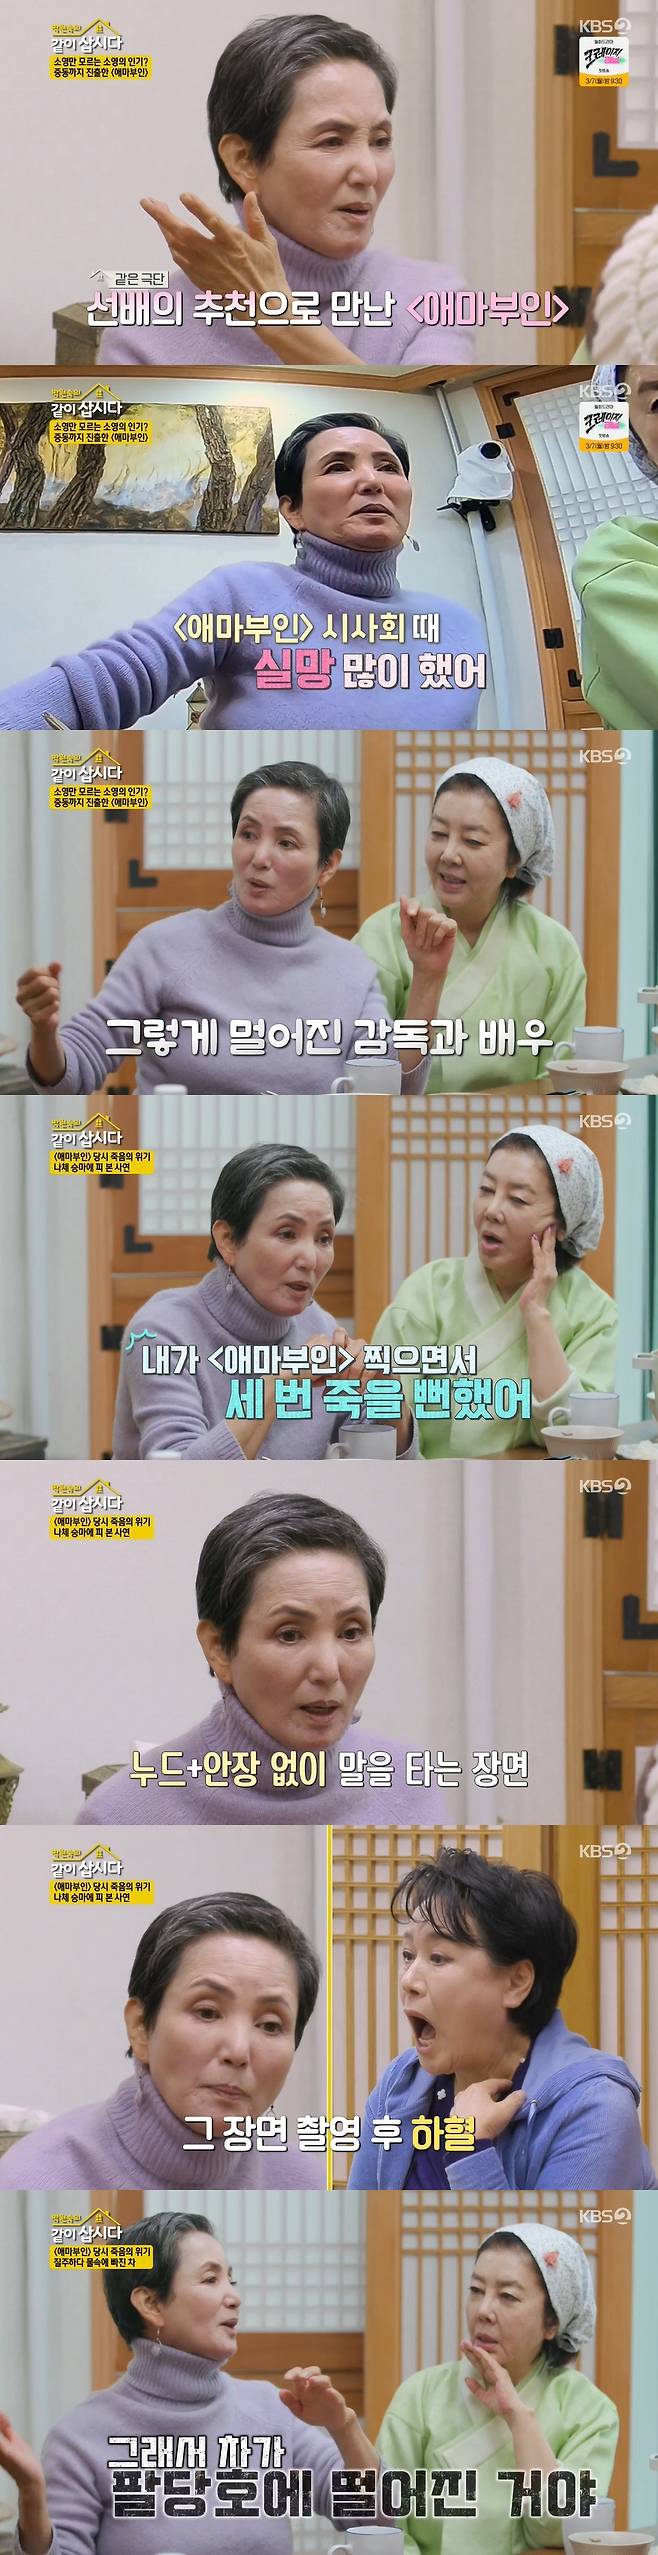 Actor Ahn So-young said he was almost killed three times, including bleeding and fainting during the filming of The Wife.Ahn So Young appeared on KBS 2TV Lets Live With Park Won-sook Season 3 on the 23rd and confessed his troubles as Madame behind Kahaani and For Keeps.I think the image is wrong since I was a child. People look at me like I am a child.I have been in school since I was in school before my wife, he said.After the filming of The Wife, the sexy actor image became harder and he did not even get a chance to perform another performance.Even if people are now this Age, they only see me as the wife of the wife. I do not see Actor An So Young. Ahn So-young, who was nominated by the director of the drama The Wife of the Wife, said, I was disappointed in the premiere. I did not think this movie would succeed.So when I opened the movie, I went abroad, but people from abroad recognized me. He said that he felt the popularity of Mrs.Ahn So-young released the behind-the-scenes footage of The Wife of the Wife.He said, I have never met a director throughout the film. He said, When Actor sees the scenario and works, there is a scene in Conti that was not in the scenario when he went to the scene.I was the director and the enemy because I kept asking for strange things. All the shootings communicated with the assistant director and stayed with the director until the end of the movie. I was surprised to find that I almost died three times while filming Mrs. Ama. Ahn So-young said, I ride the horse with all nude and ride without saddle.I took a lot of blood after I took it, so I said, If I can not have a child, I will be responsible. Also, while shooting a rain scene on a cold day, the water was frozen and fell, causing a wound to the body, and the whole body was frozen and fainted.In addition, Ahn So Young surprised everyone by saying, The car has fallen into the water during shooting.Ahn So-young, who was a novice driver at the time, was driving at a coachs instructions to run the unpaved road at 100 km / h, and when he saw a person passing by, he was afraid to break the steering wheel and his car fell into the Paldang Lake.I was riding Actor Ha Jae-young in the back seat and fell into the water together.I lost my mind for a while and suddenly I looked up and said, The sky does not kill me yet. I opened my eyes and I was in the water. The windshield of the car broke out and I could not swim.People were looking for me and I was in a hurry. Ahn So-young, who wants to get out of the image of Mrs.I was a dreamer since I was a child, and I want to be an actor. I am sorry that I have not done various things because I am highlighted as an image.If I became the actor I wanted, I would not have such a mind, but if I could not do it, I would be so unfair if I died like this. On the other hand, Ahn So Young, who raised his son alone, asked about the child Father, saying, I like PFC Levski Sofia, but I went to ride PFC Levski Sofia with my child Father and had a son.At first, I thought that my child Father was divorced, but when I found out, I was not divorced, but I was divorced, he said. I decided to have a child alone because I could not give up.I erased the name An So Young and went to United States of America to live hard as a mother. Ahn So-young, who went to United States of America alone with his son to avoid a parent prejudice, said he had a hard time with his son through puberty.My son was not able to play Father in puberty, so I was rotting.At that time, I took my sons house and asked his acquaintance. My son recalled, I really wanted to do what I should do if my mother is a woman and I do not know what. Ahn So-young, who tried to be stronger to not show his weak mother to his son, said, I was going to be a man because I was not going to show a weak figure.I was naturally like that when I tried to show a strong figure like Father rather than a fragile figure. I was afraid to live easily because I had a child.Im going to live with my hard work, not knowing what Im going to leave behind for my child.So I try to raise it harder. 